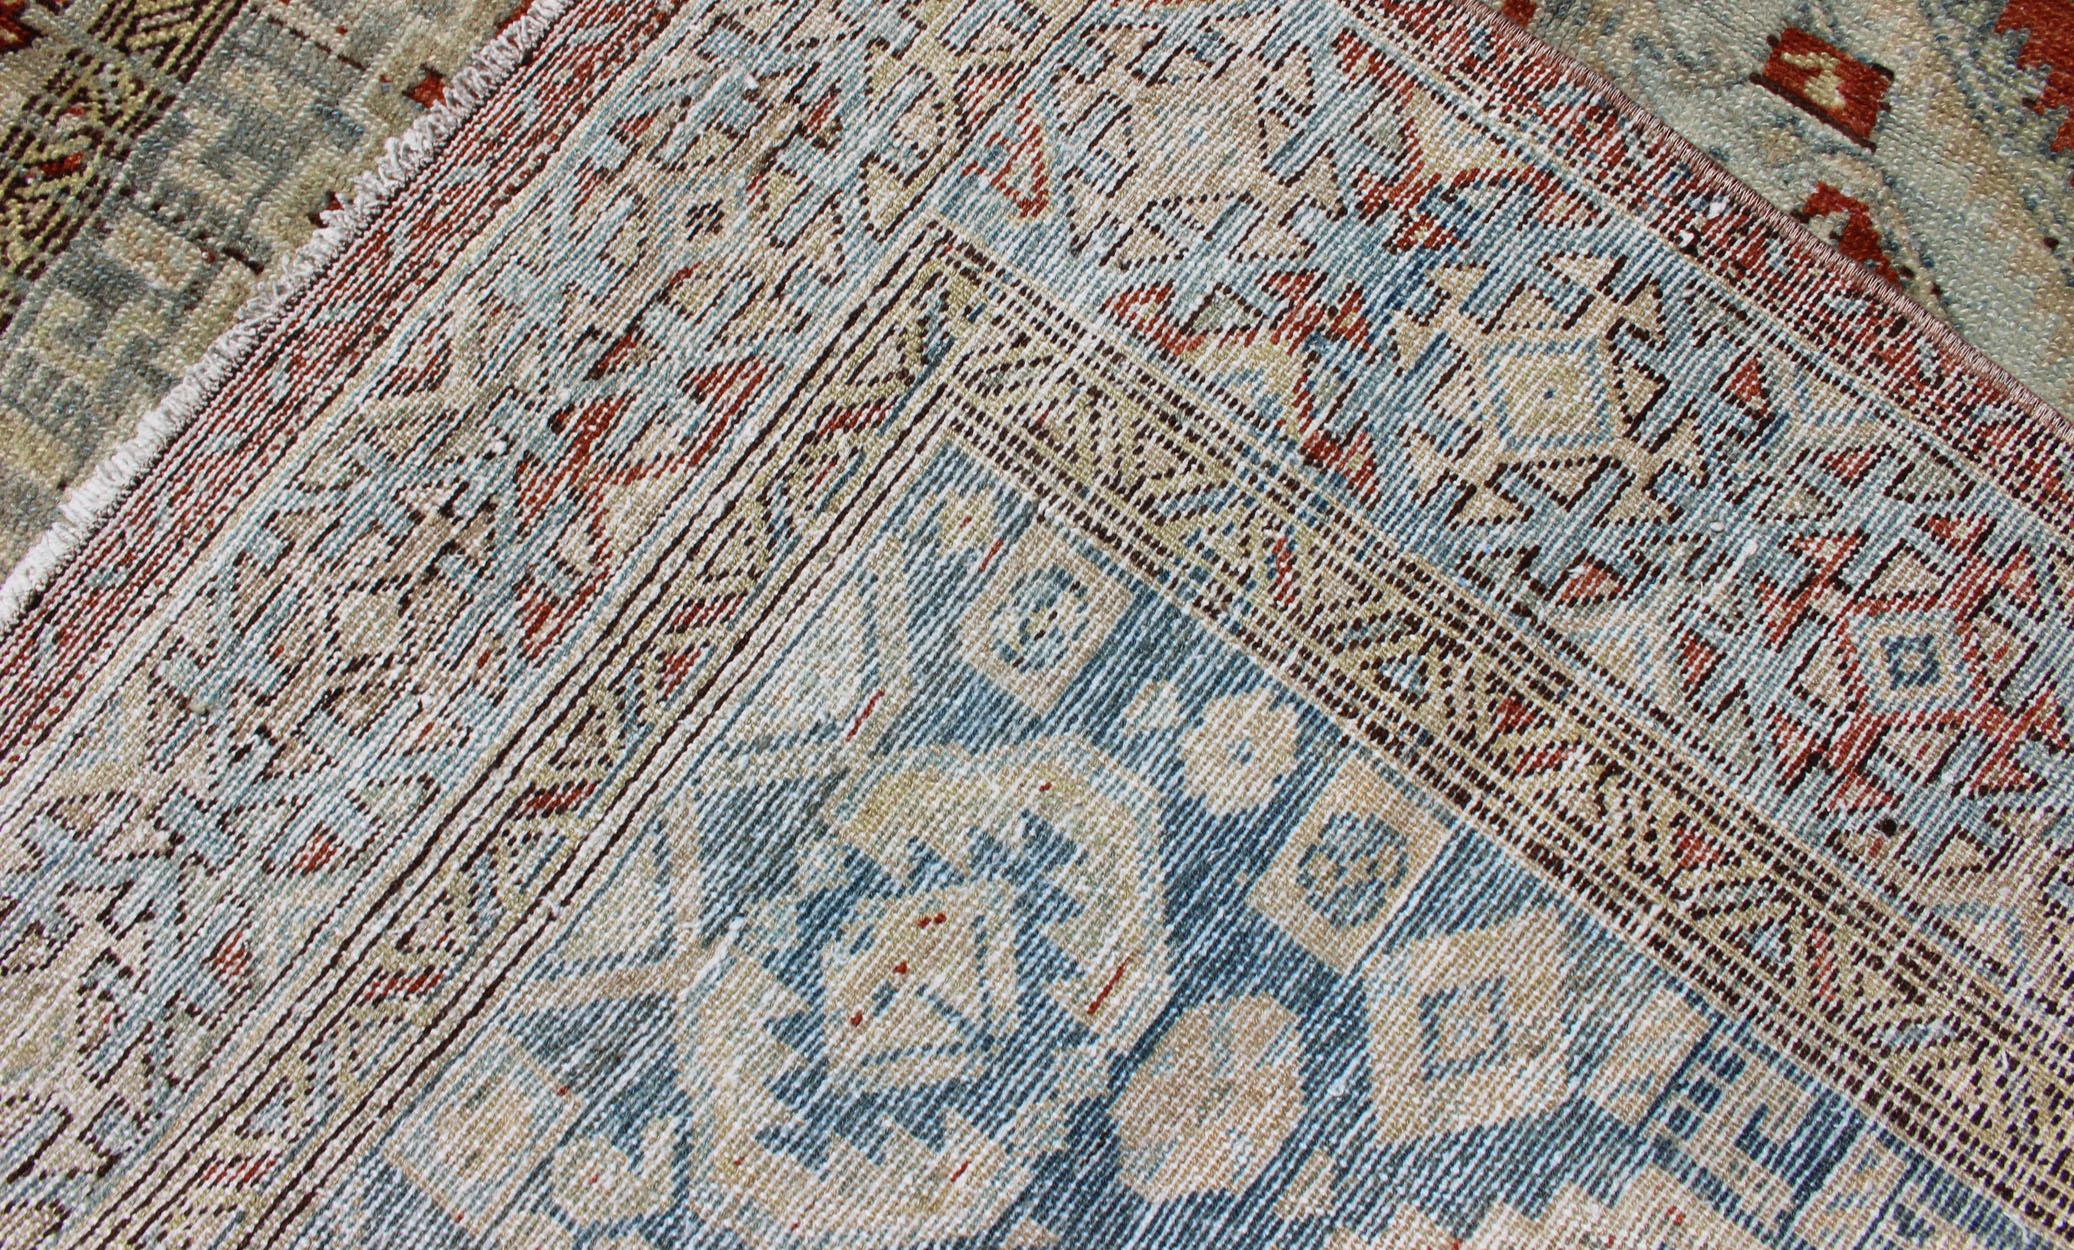 Orange-Red, Light Gray/Blue Antique Persian Malayer Rug with Geometric Design For Sale 3